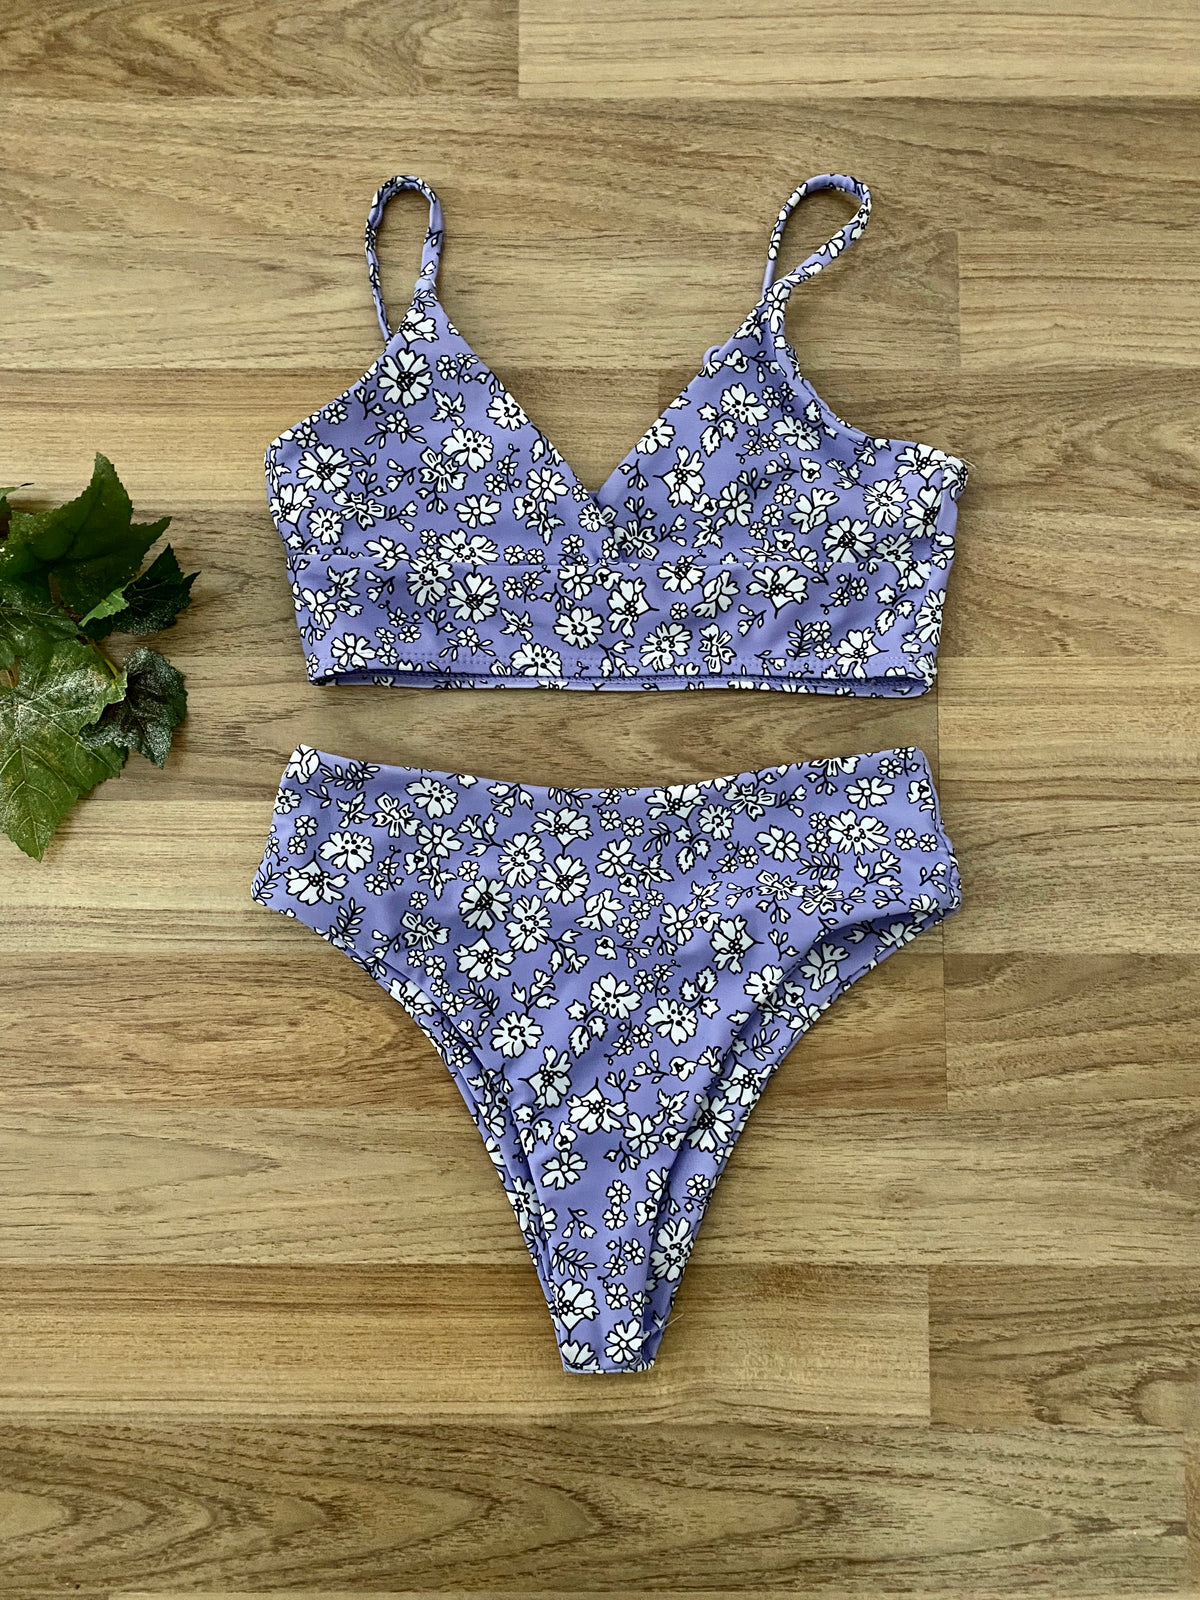 Two Piece Bathing Suit (Girls Size 9-10)